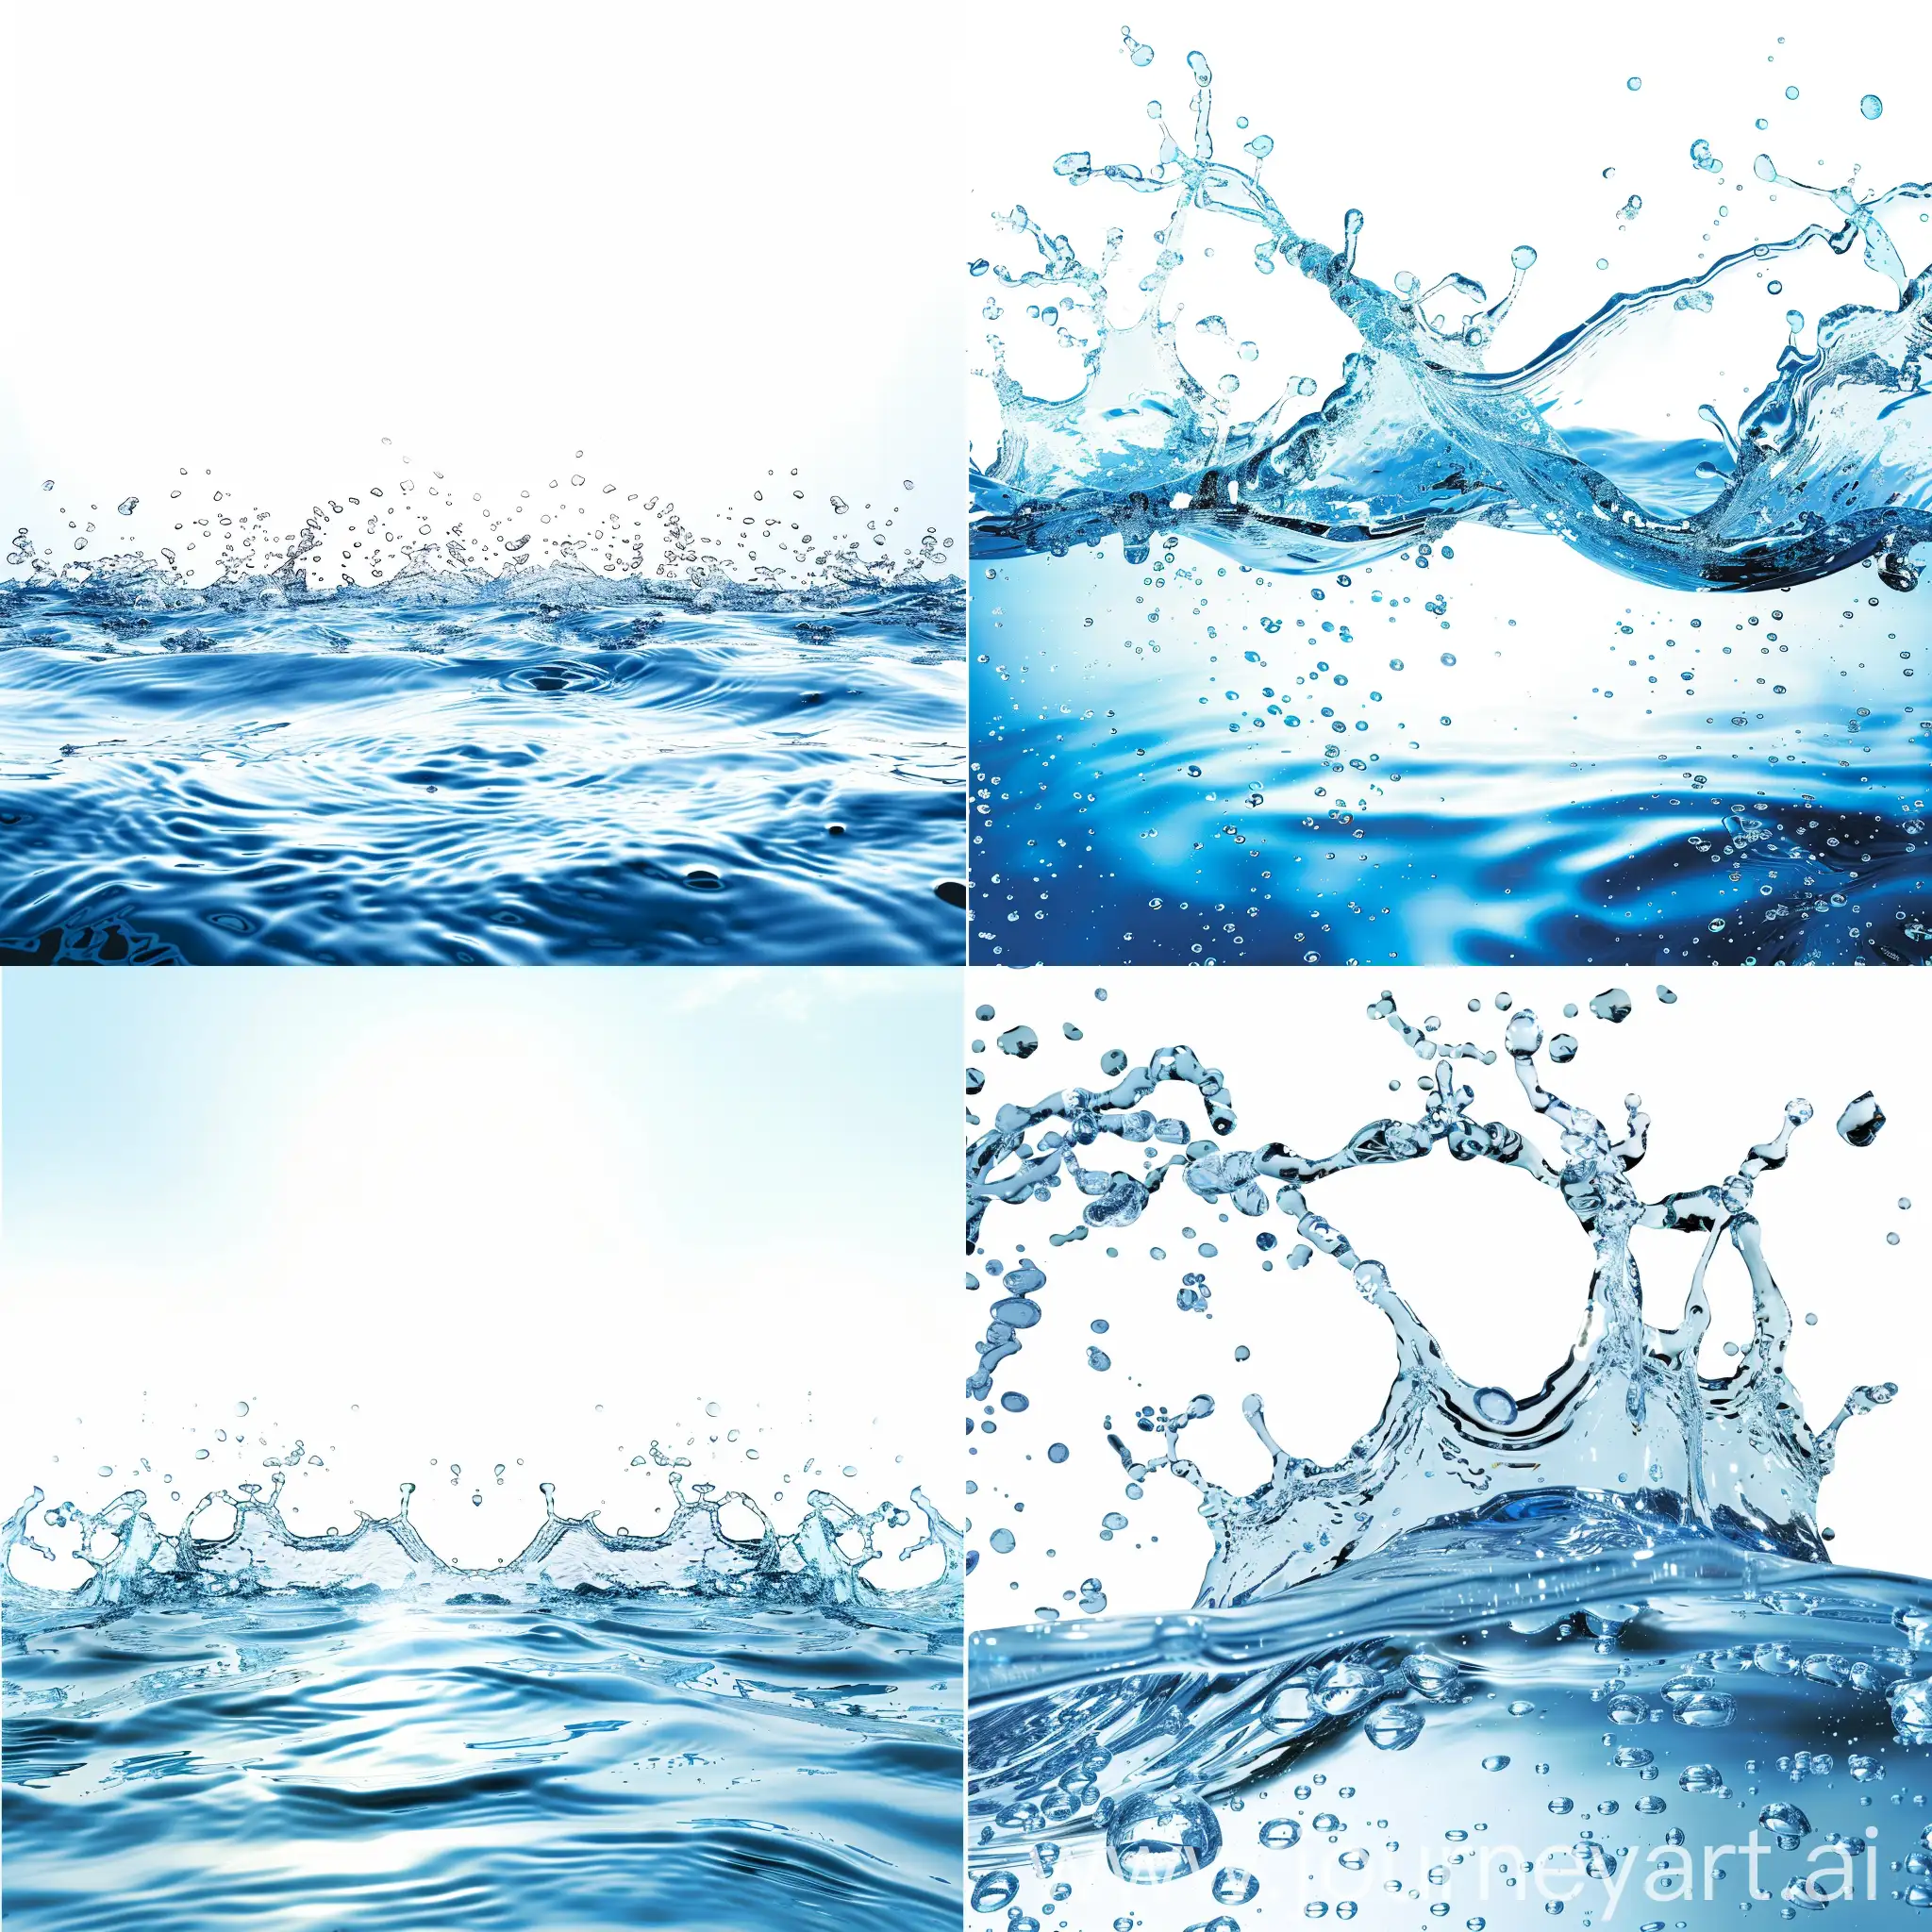 water
(*png)
no background